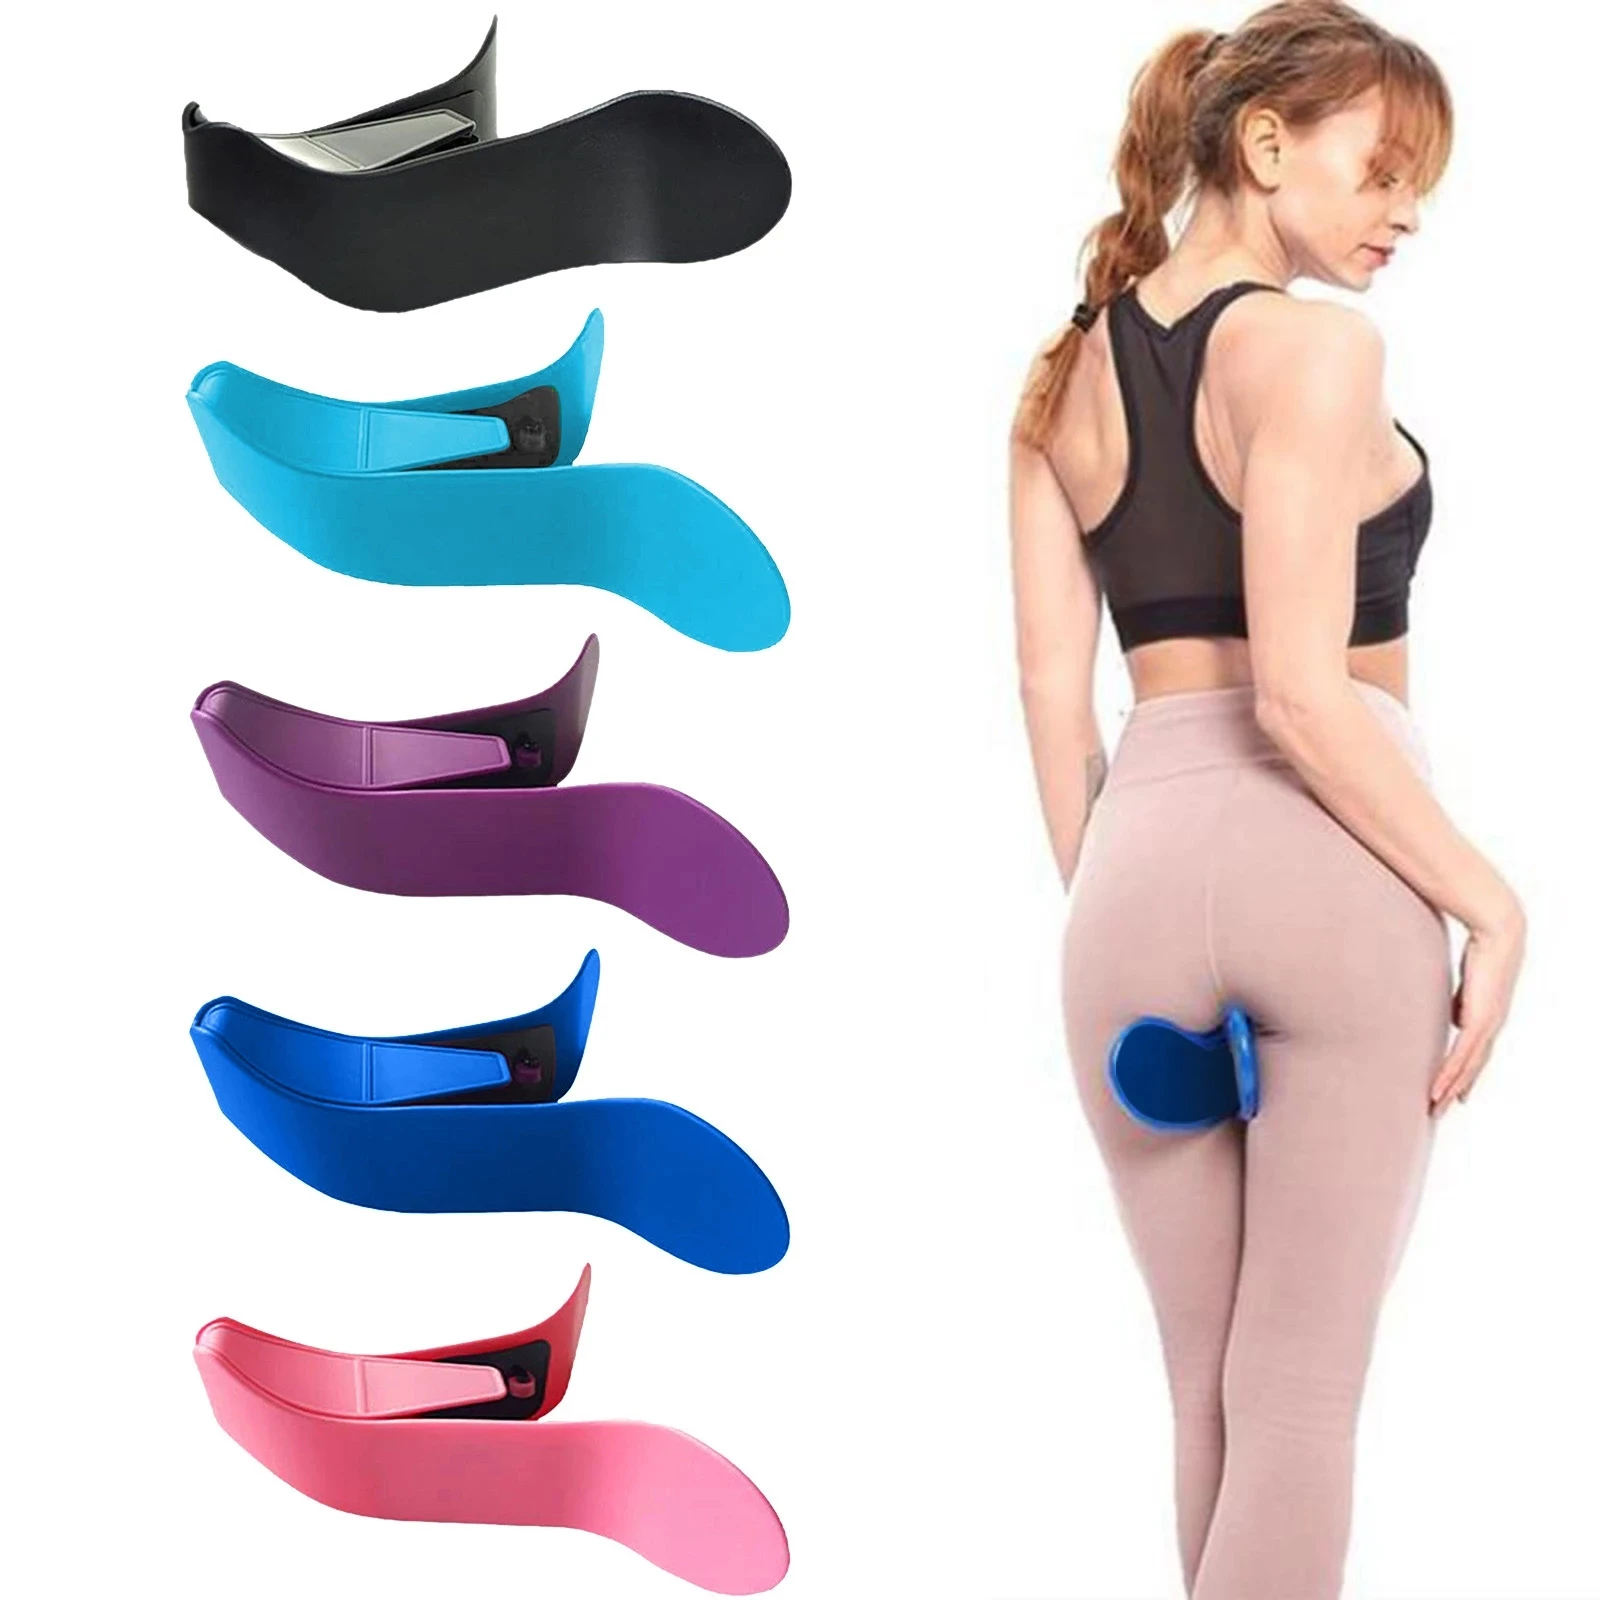 

Sexy Inner Thigh Exerciser Hip Trainer gym Home Equipment Fitness Correction Buttocks Device workout